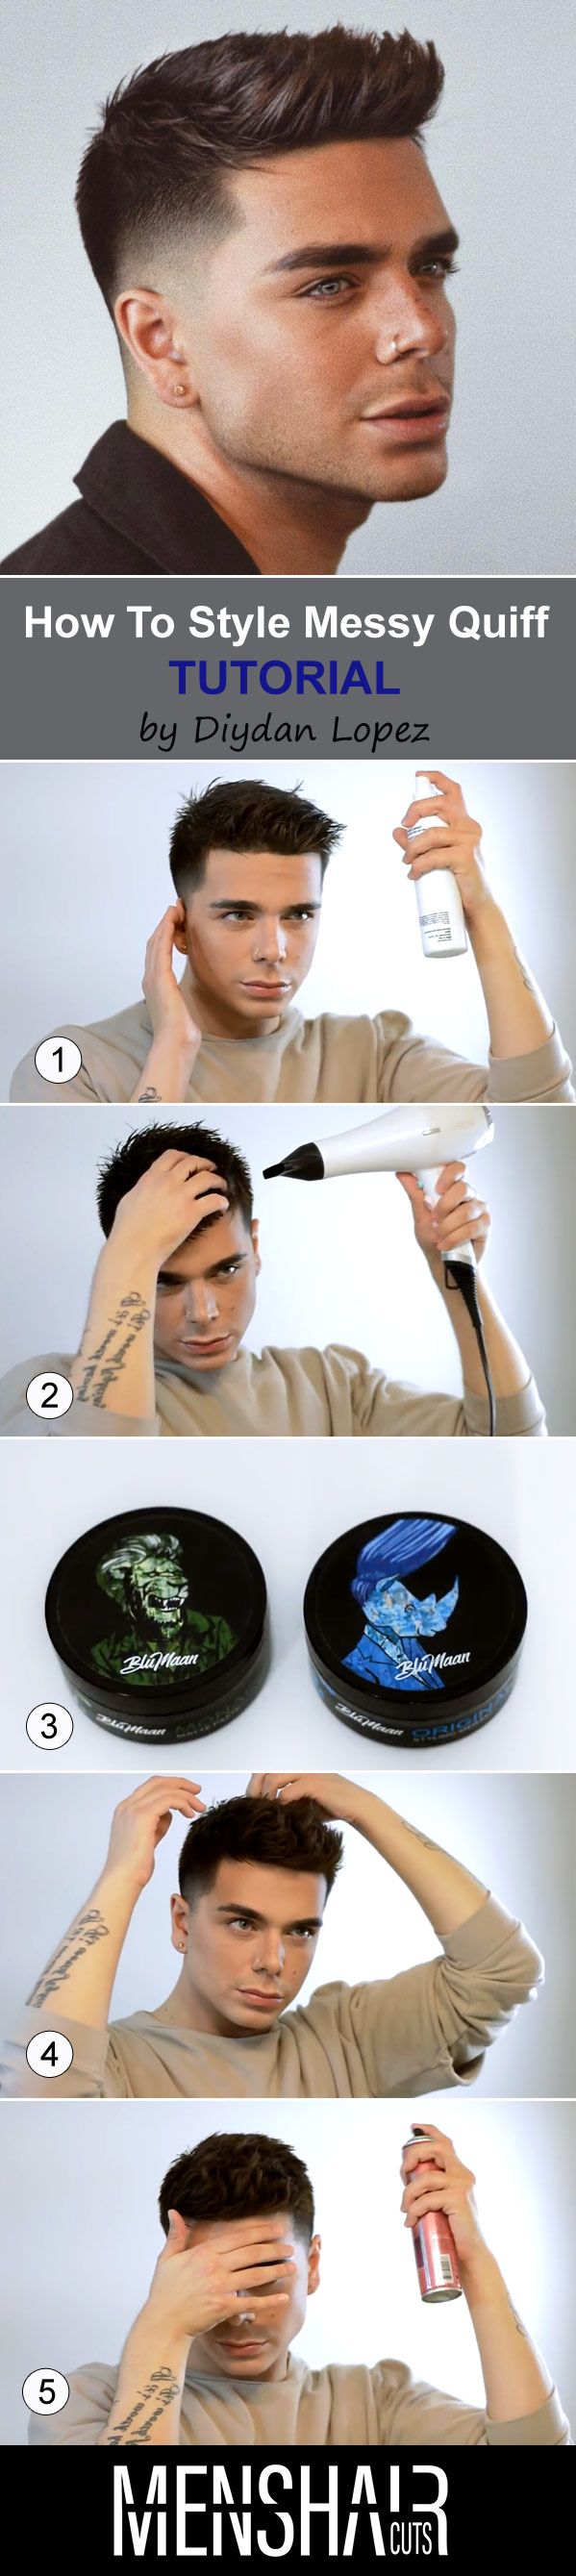 Quiff Hairstyle Ideas A Comprehensive Guide